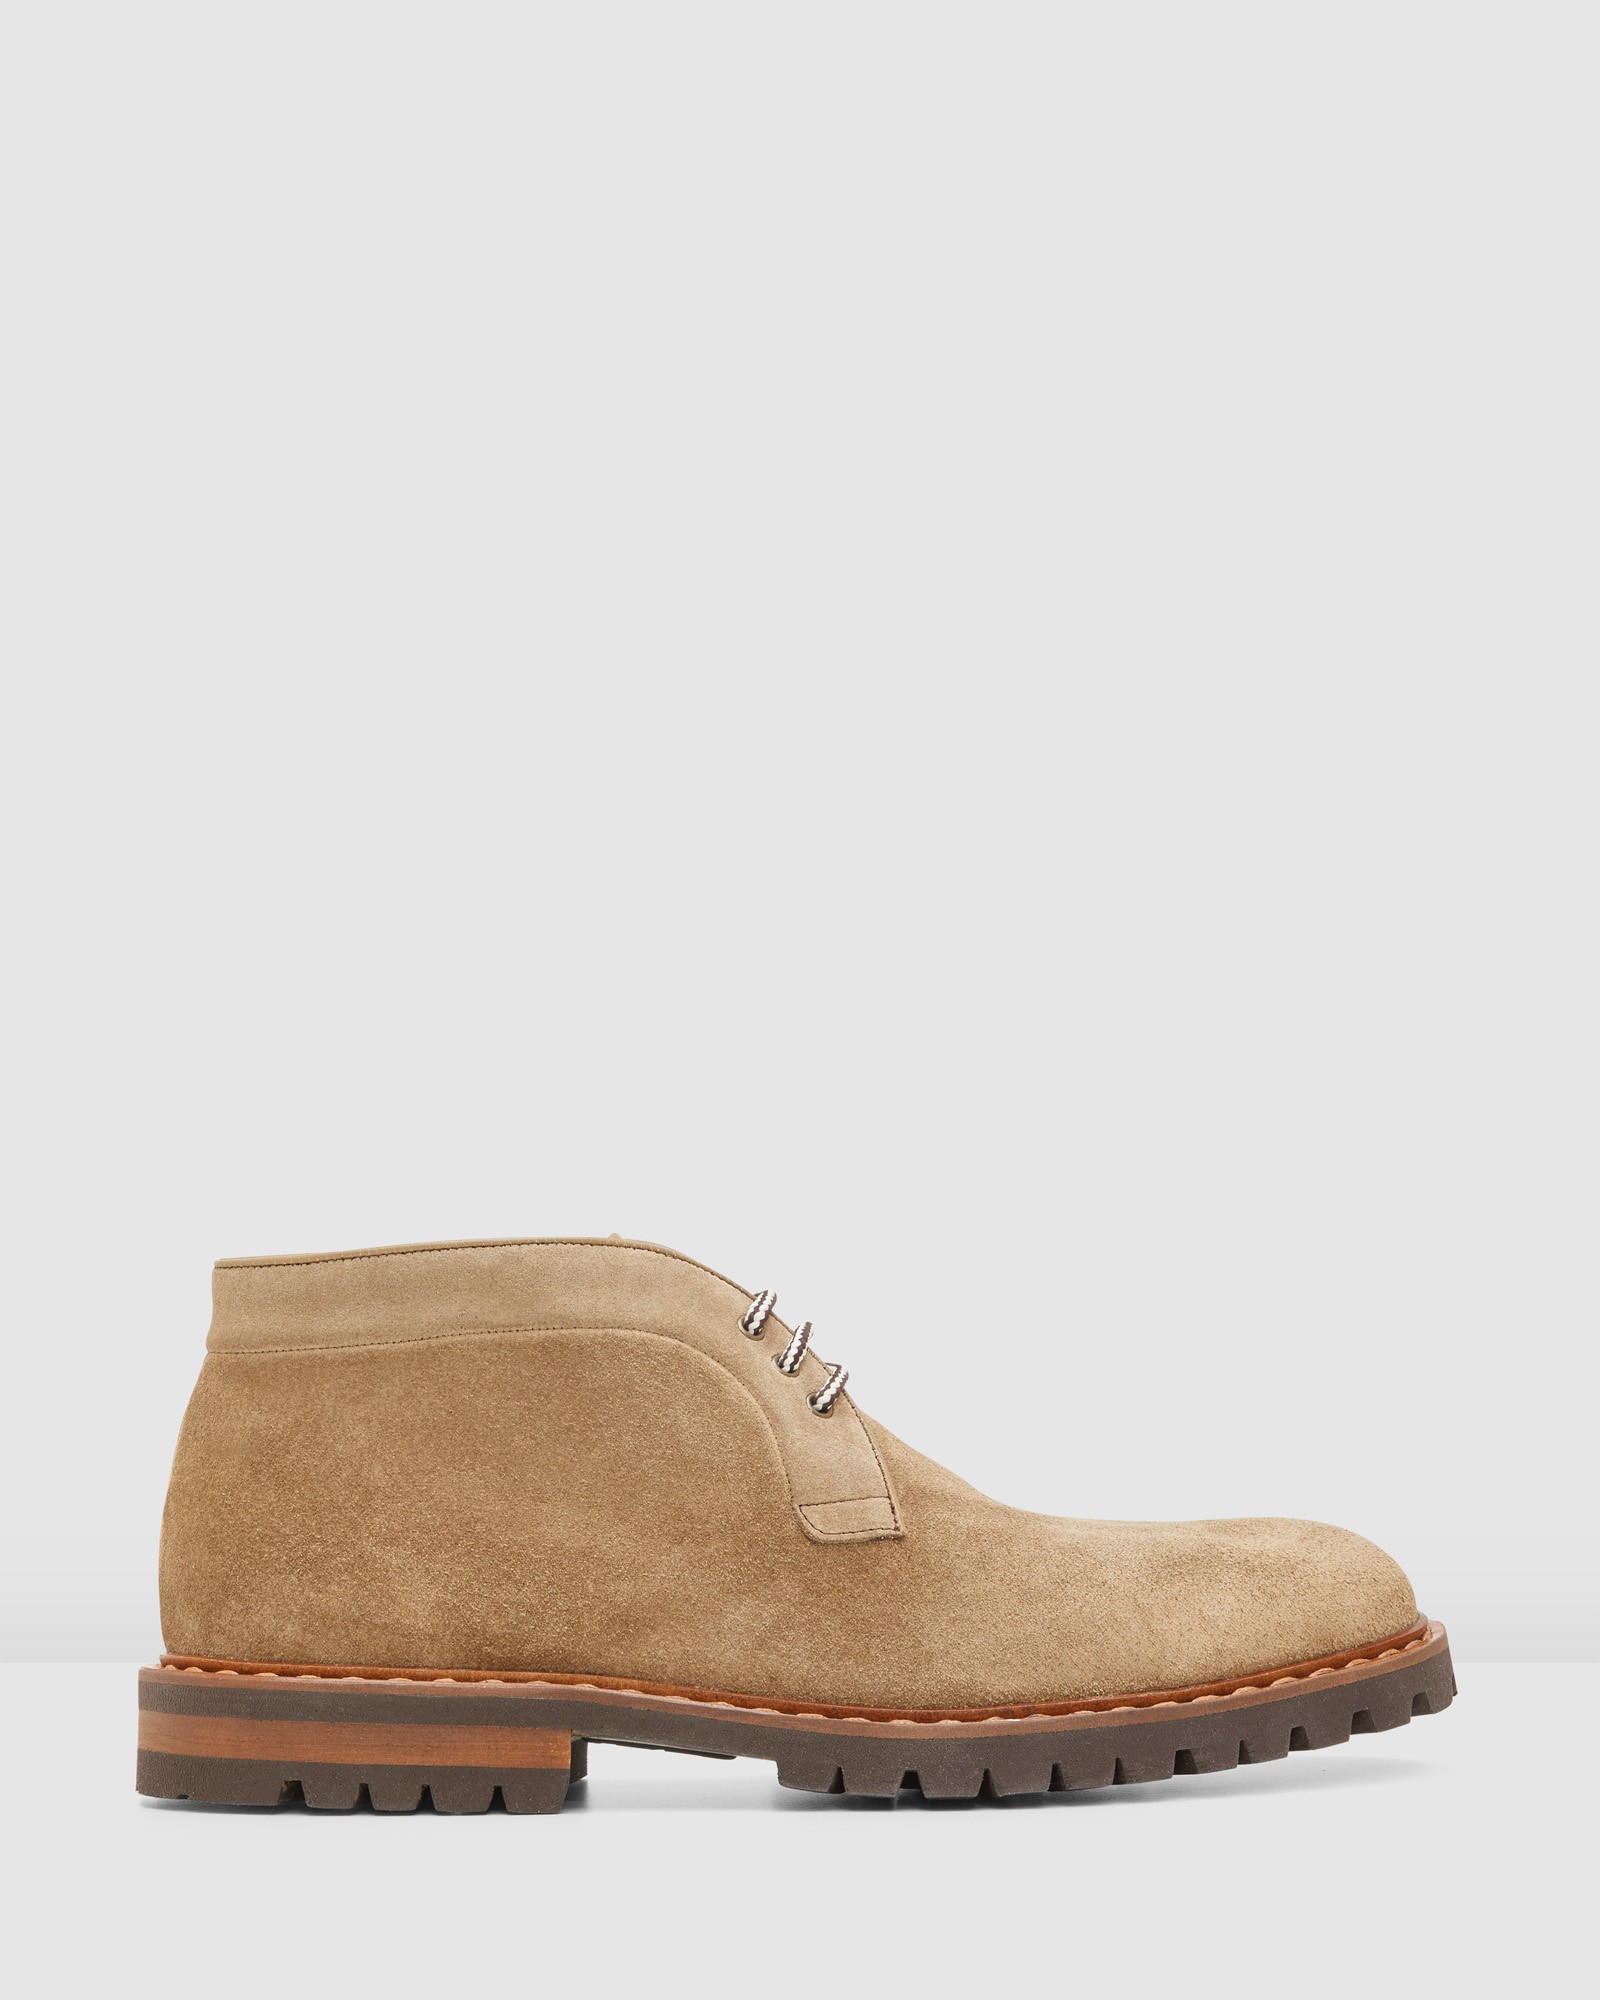 Wakefield Boots Camel by Aquila | ShoeSales